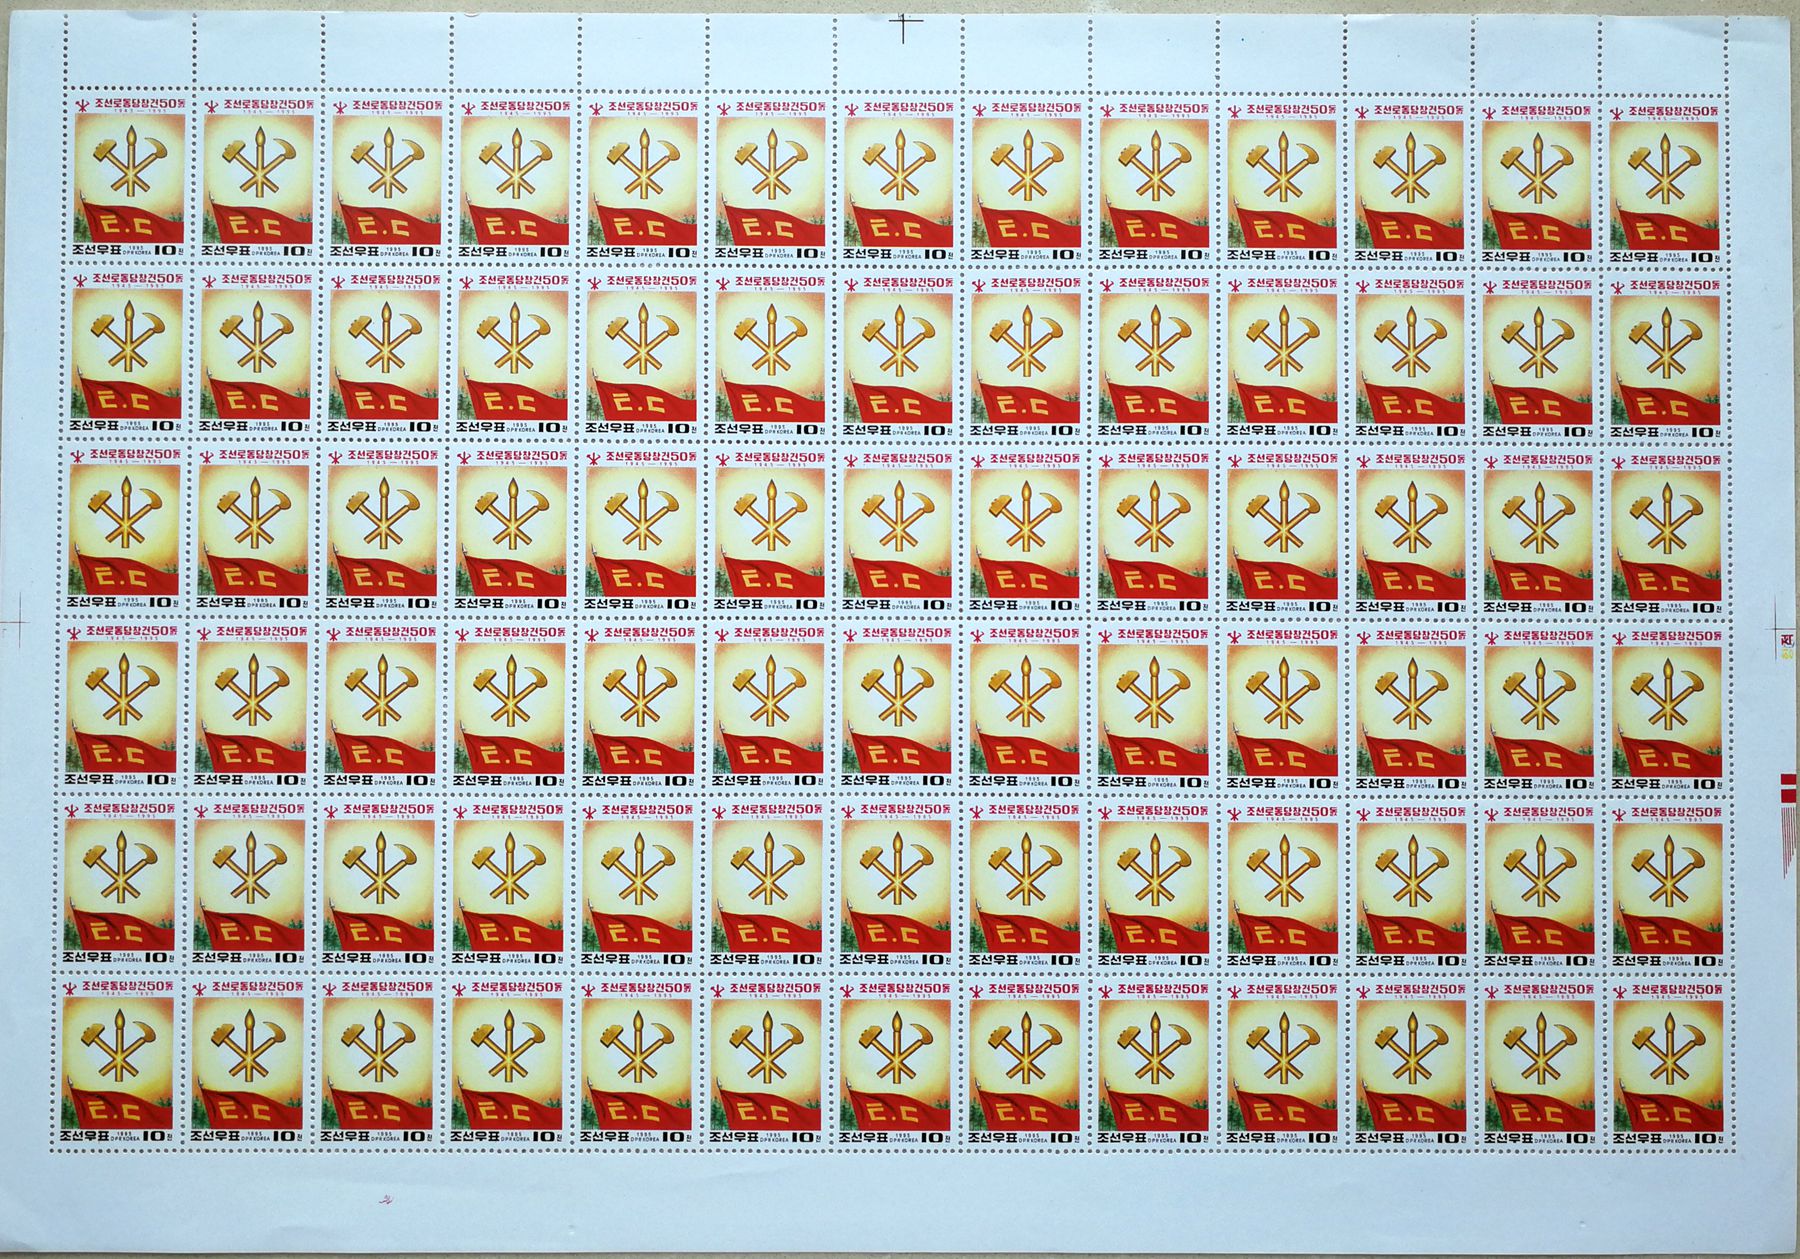 L4491, Korea "50th Anni. Workers' Party", Full Sheet of 78 Pcs Stamps, 1995 - Click Image to Close